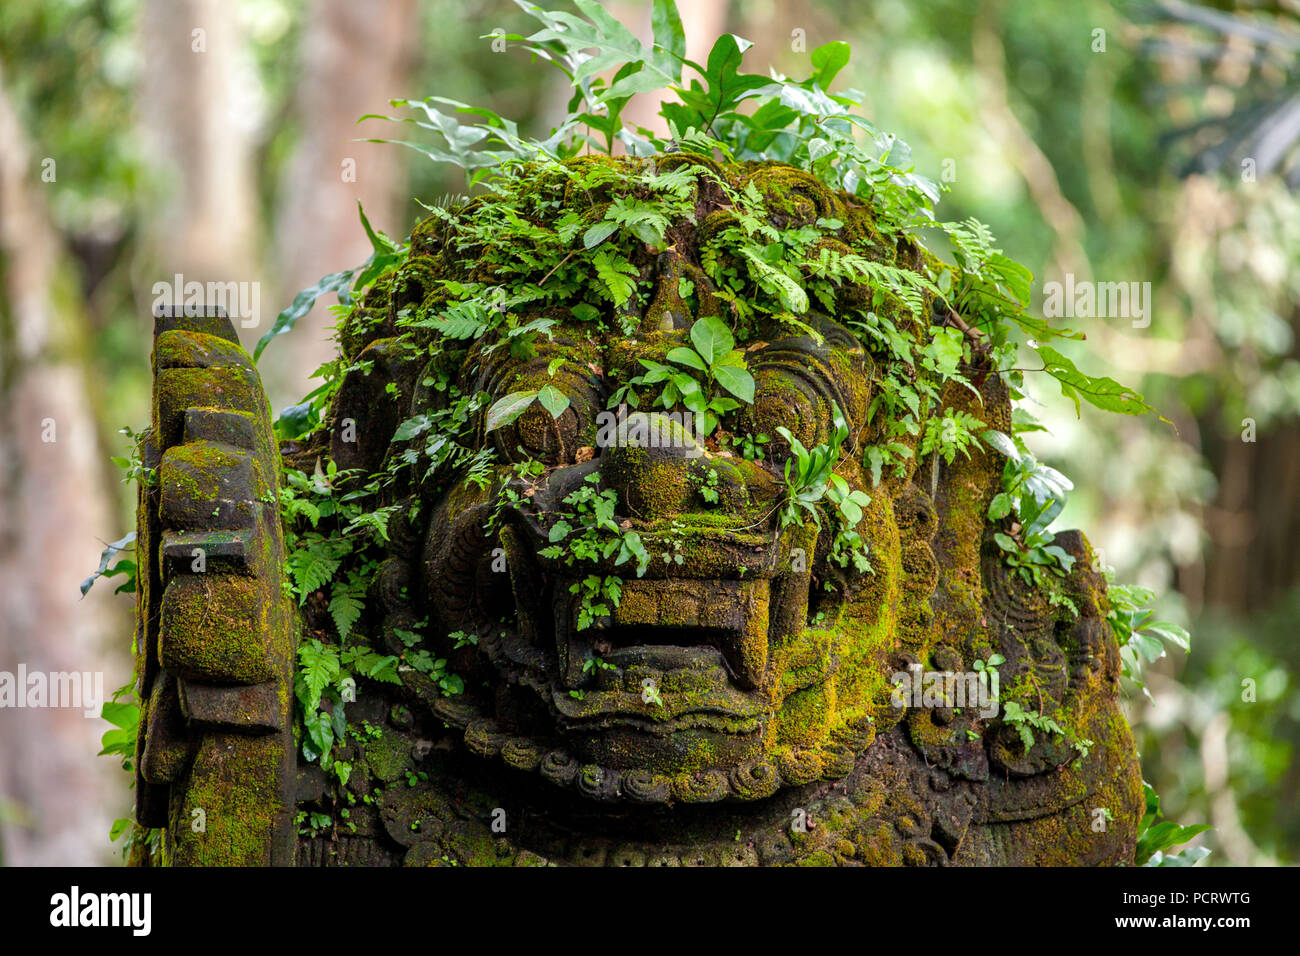 Demon's Head, at the entrance to the Monkey Forest Temple, Pura Dalem Agung Padangtegal Temple in the monkey forest of Ubud, head carved out of stone overgrown with green plants, Ubud, Bali, Indonesia, Asia Stock Photo